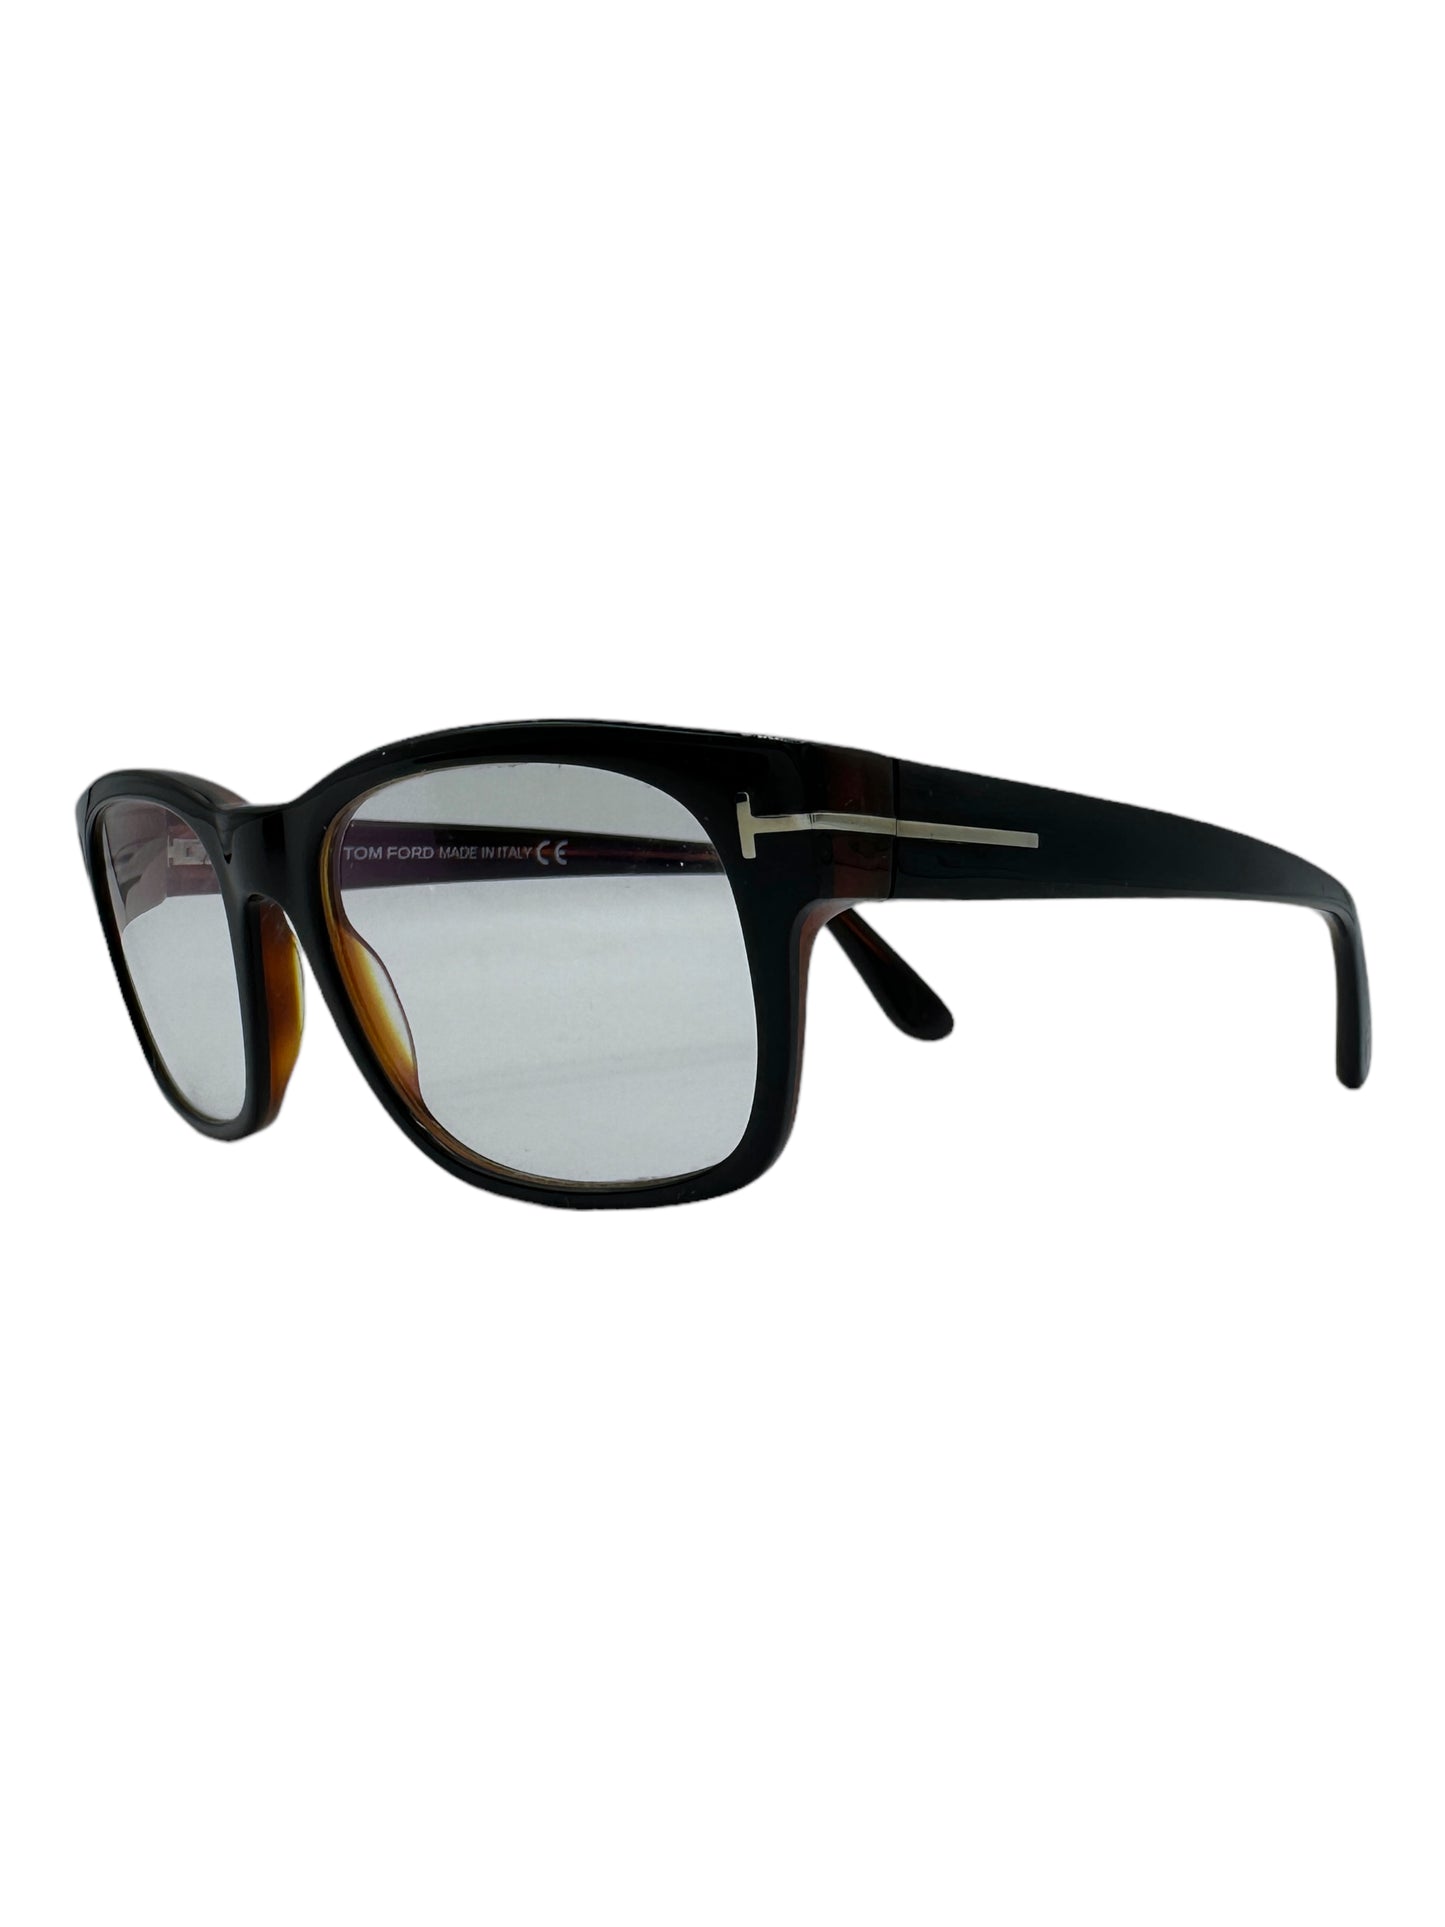 Tom Ford Black TF5432 Square Framed Eyeglasses - Genuine Design Luxury Consignment for Men. New & Pre-Owned Clothing, Shoes, & Accessories. Calgary, Canada